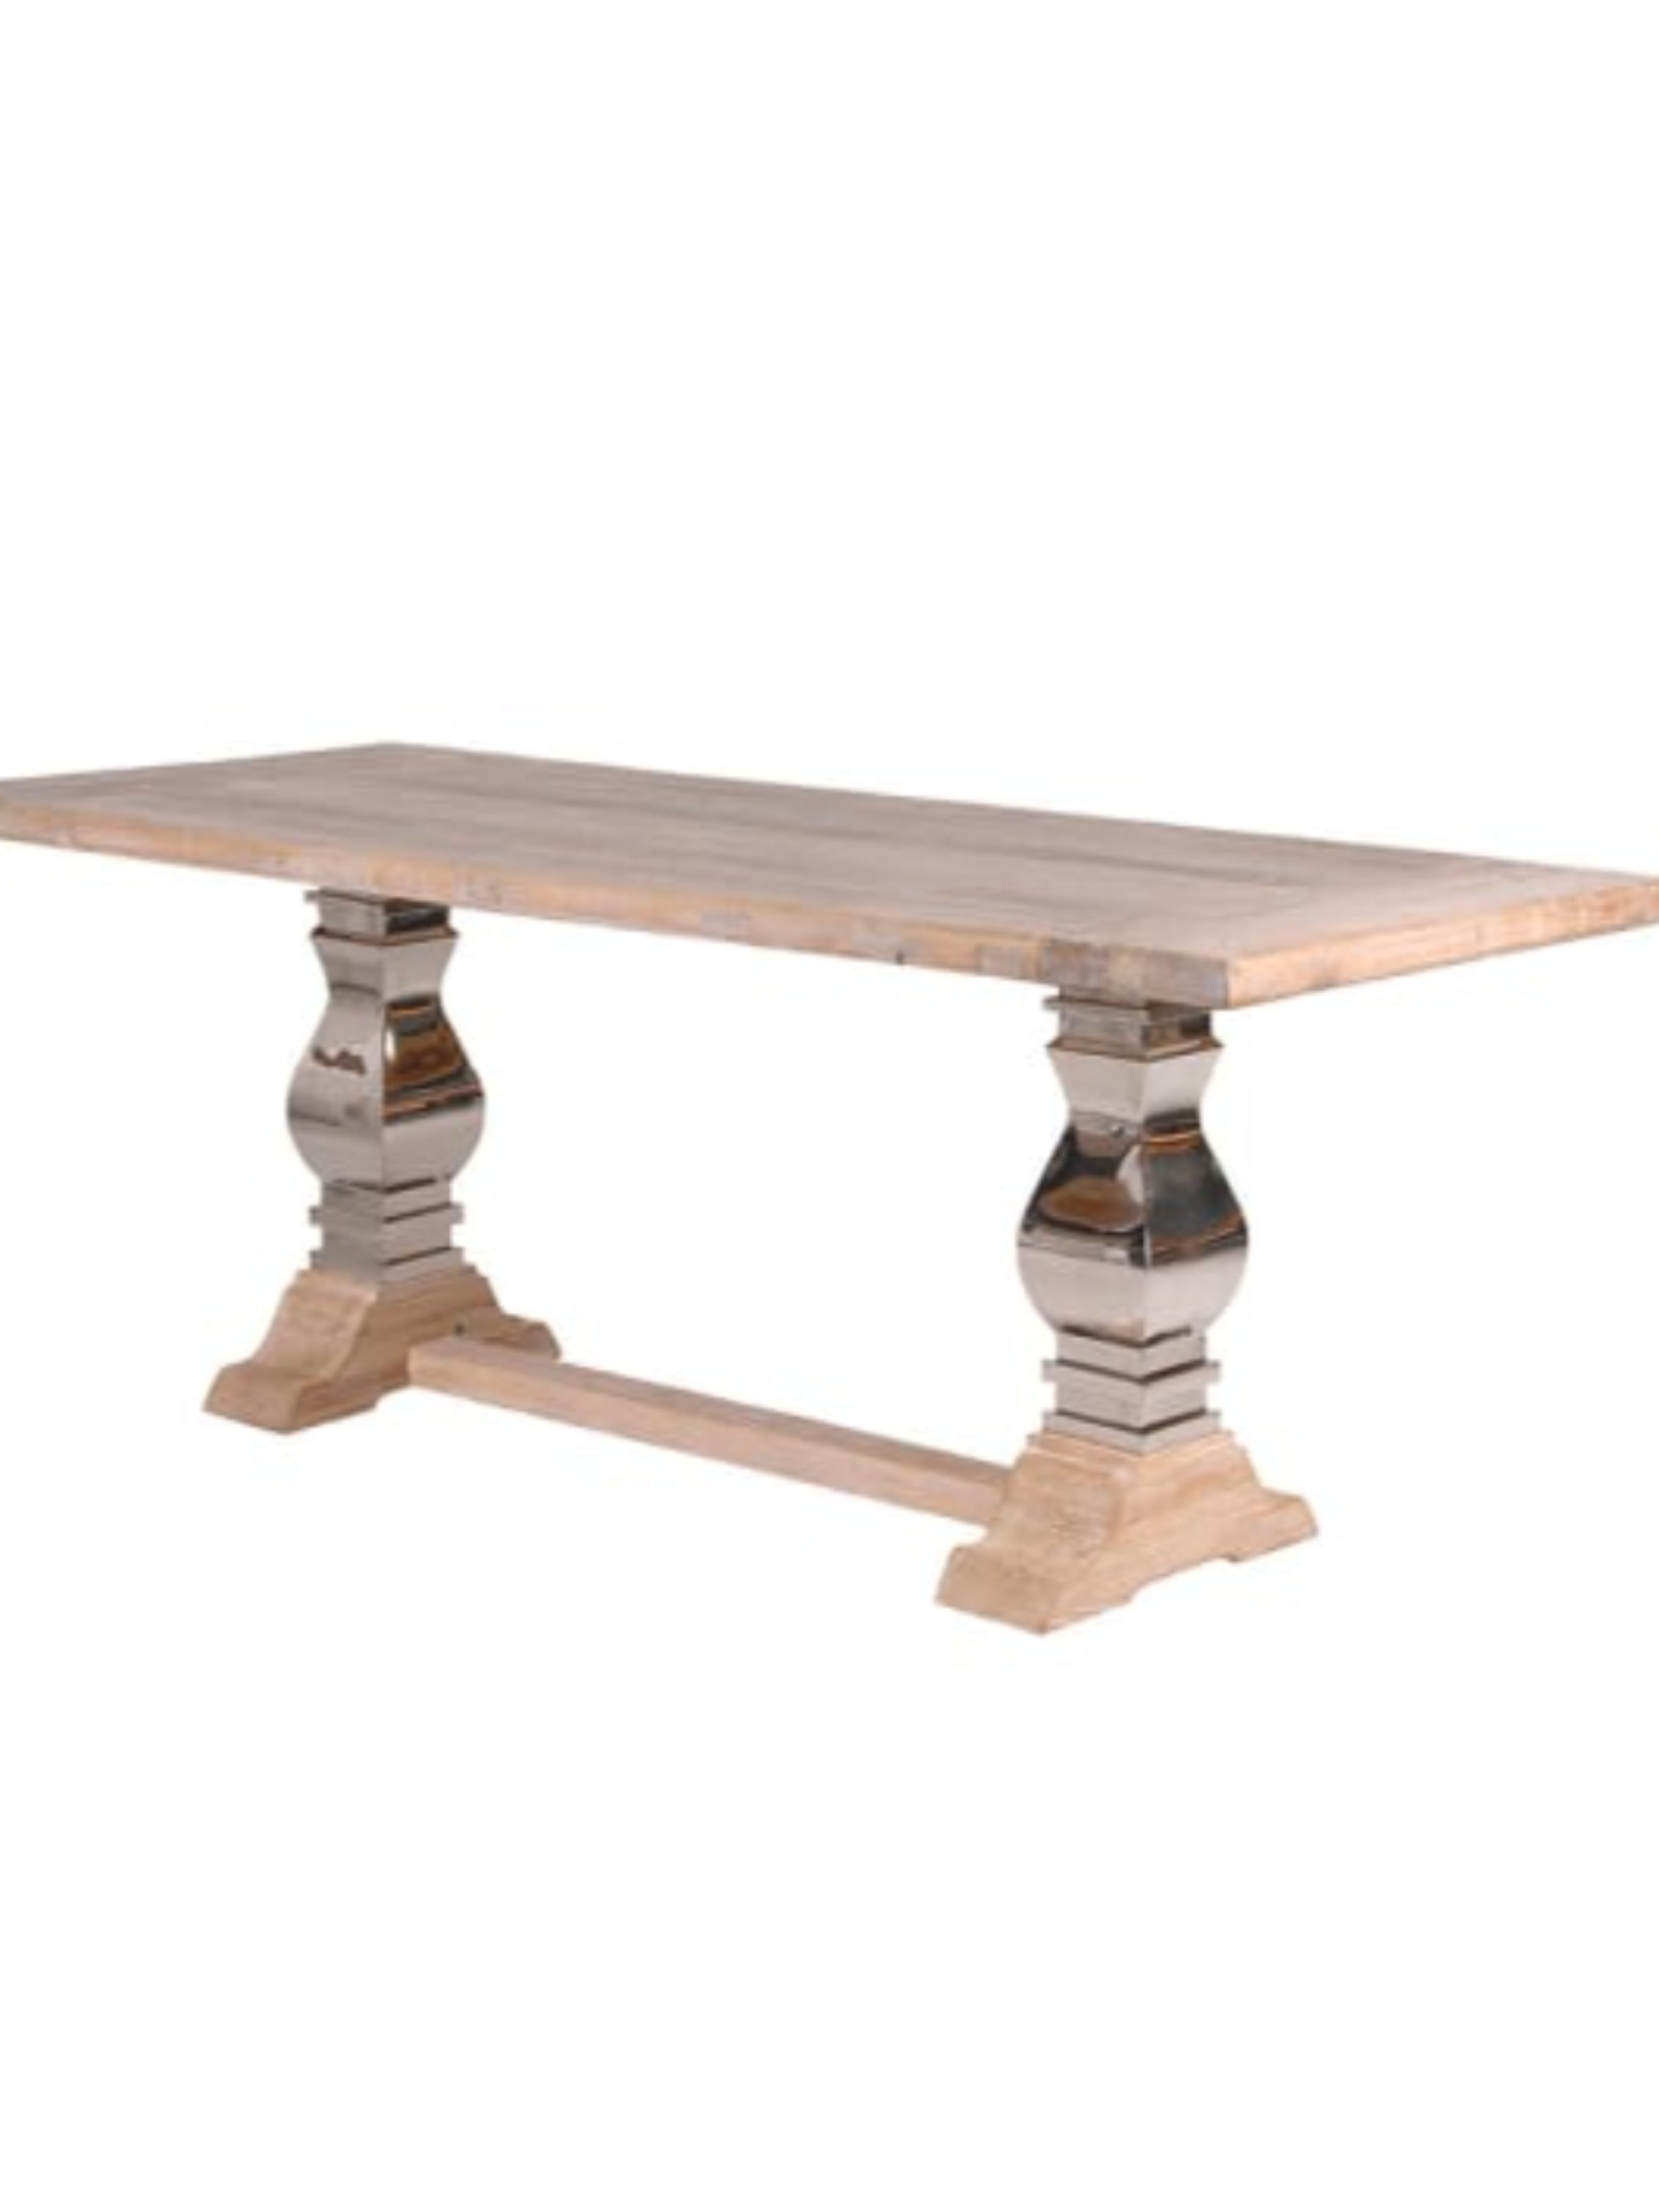 Steel and Wood Refectory Dining Table